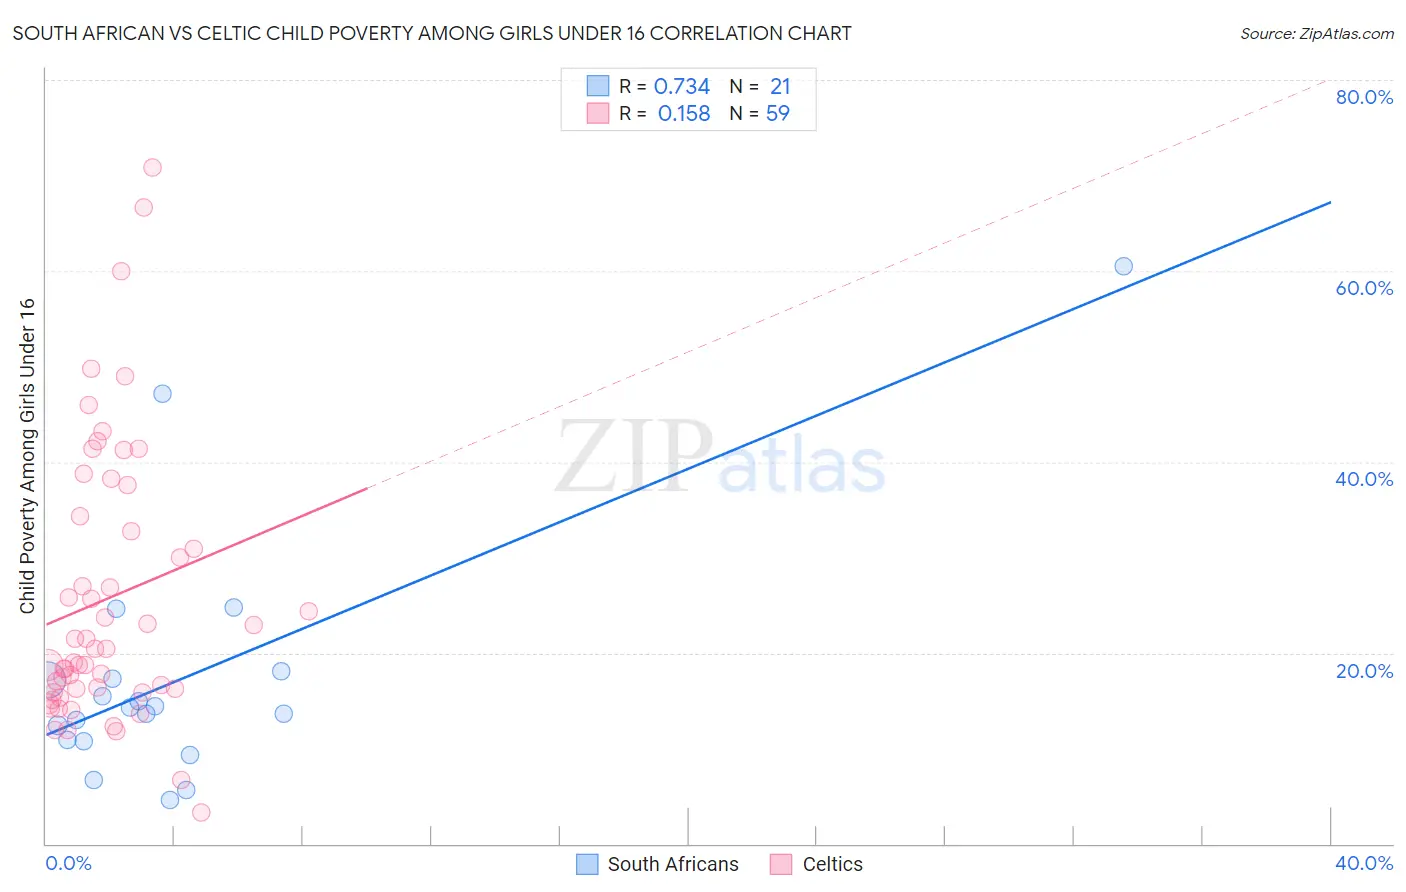 South African vs Celtic Child Poverty Among Girls Under 16